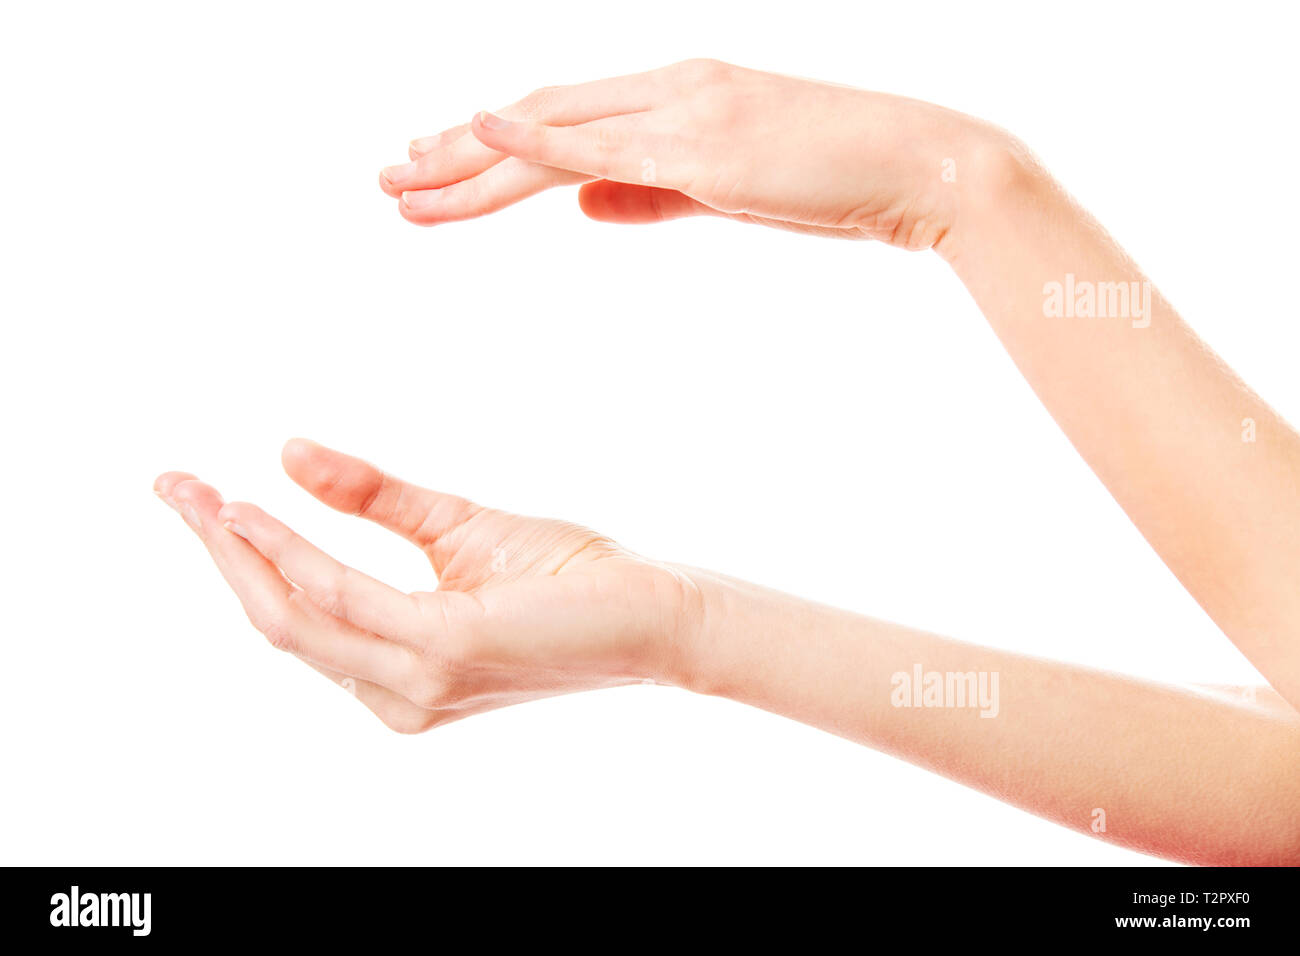 Beautiful women hands showing empty space, isolated on white background. Stock Photo